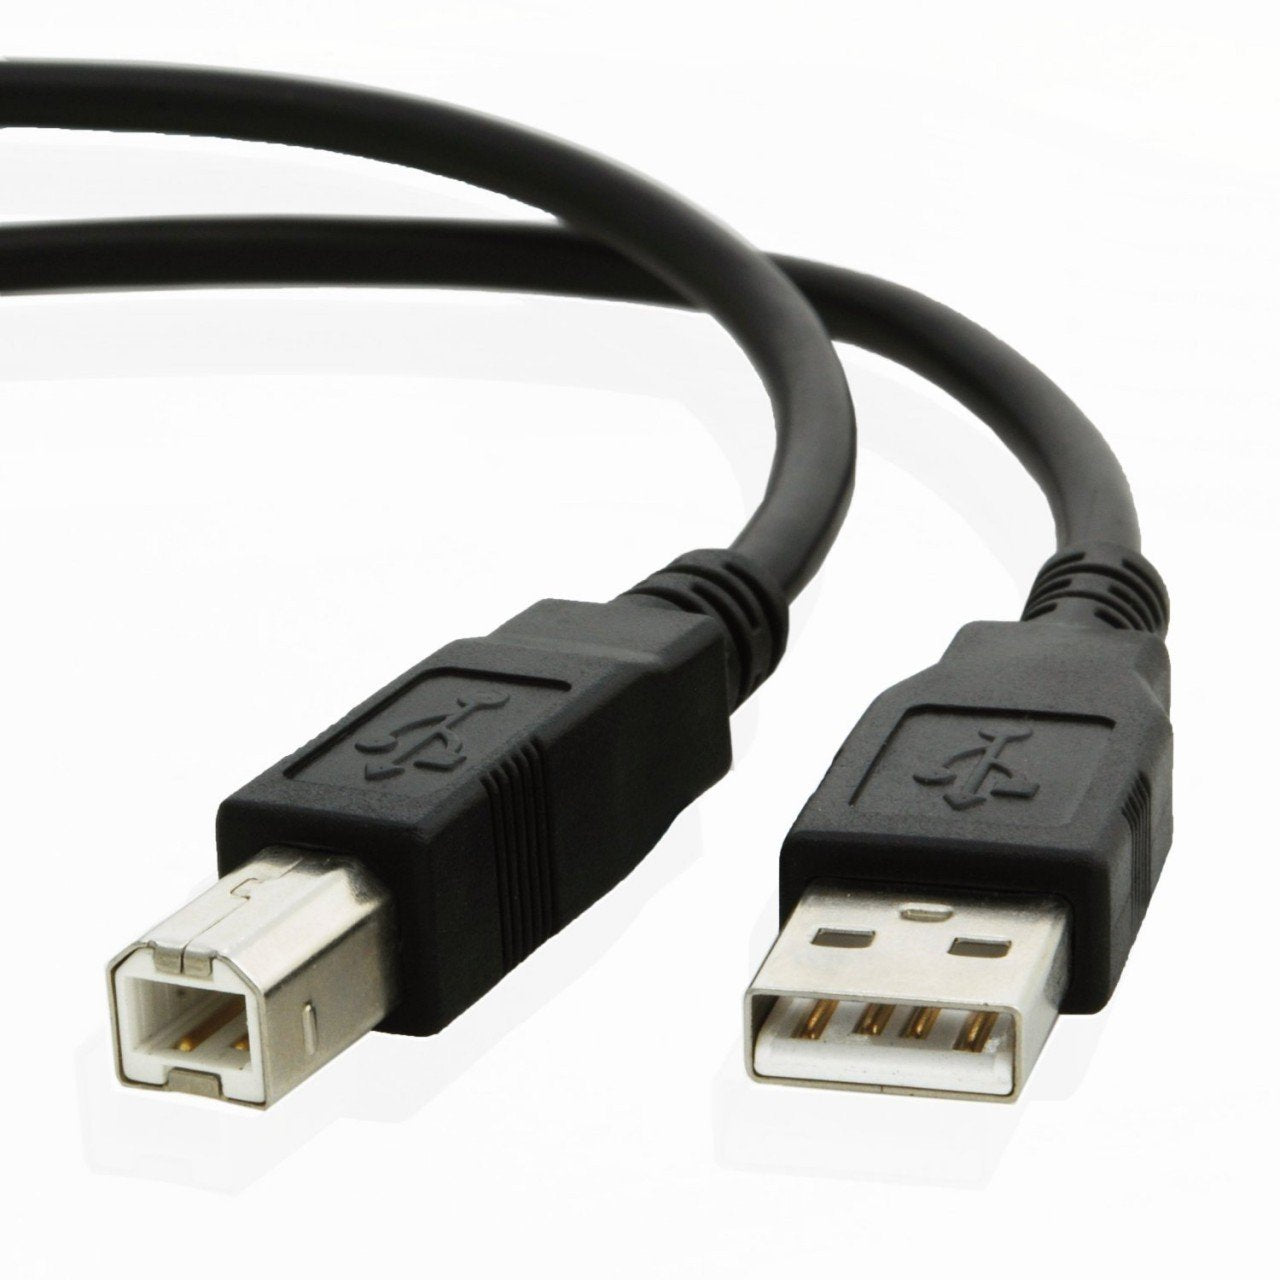 USB cable for Epson WORKFORCE PRO GT-S80